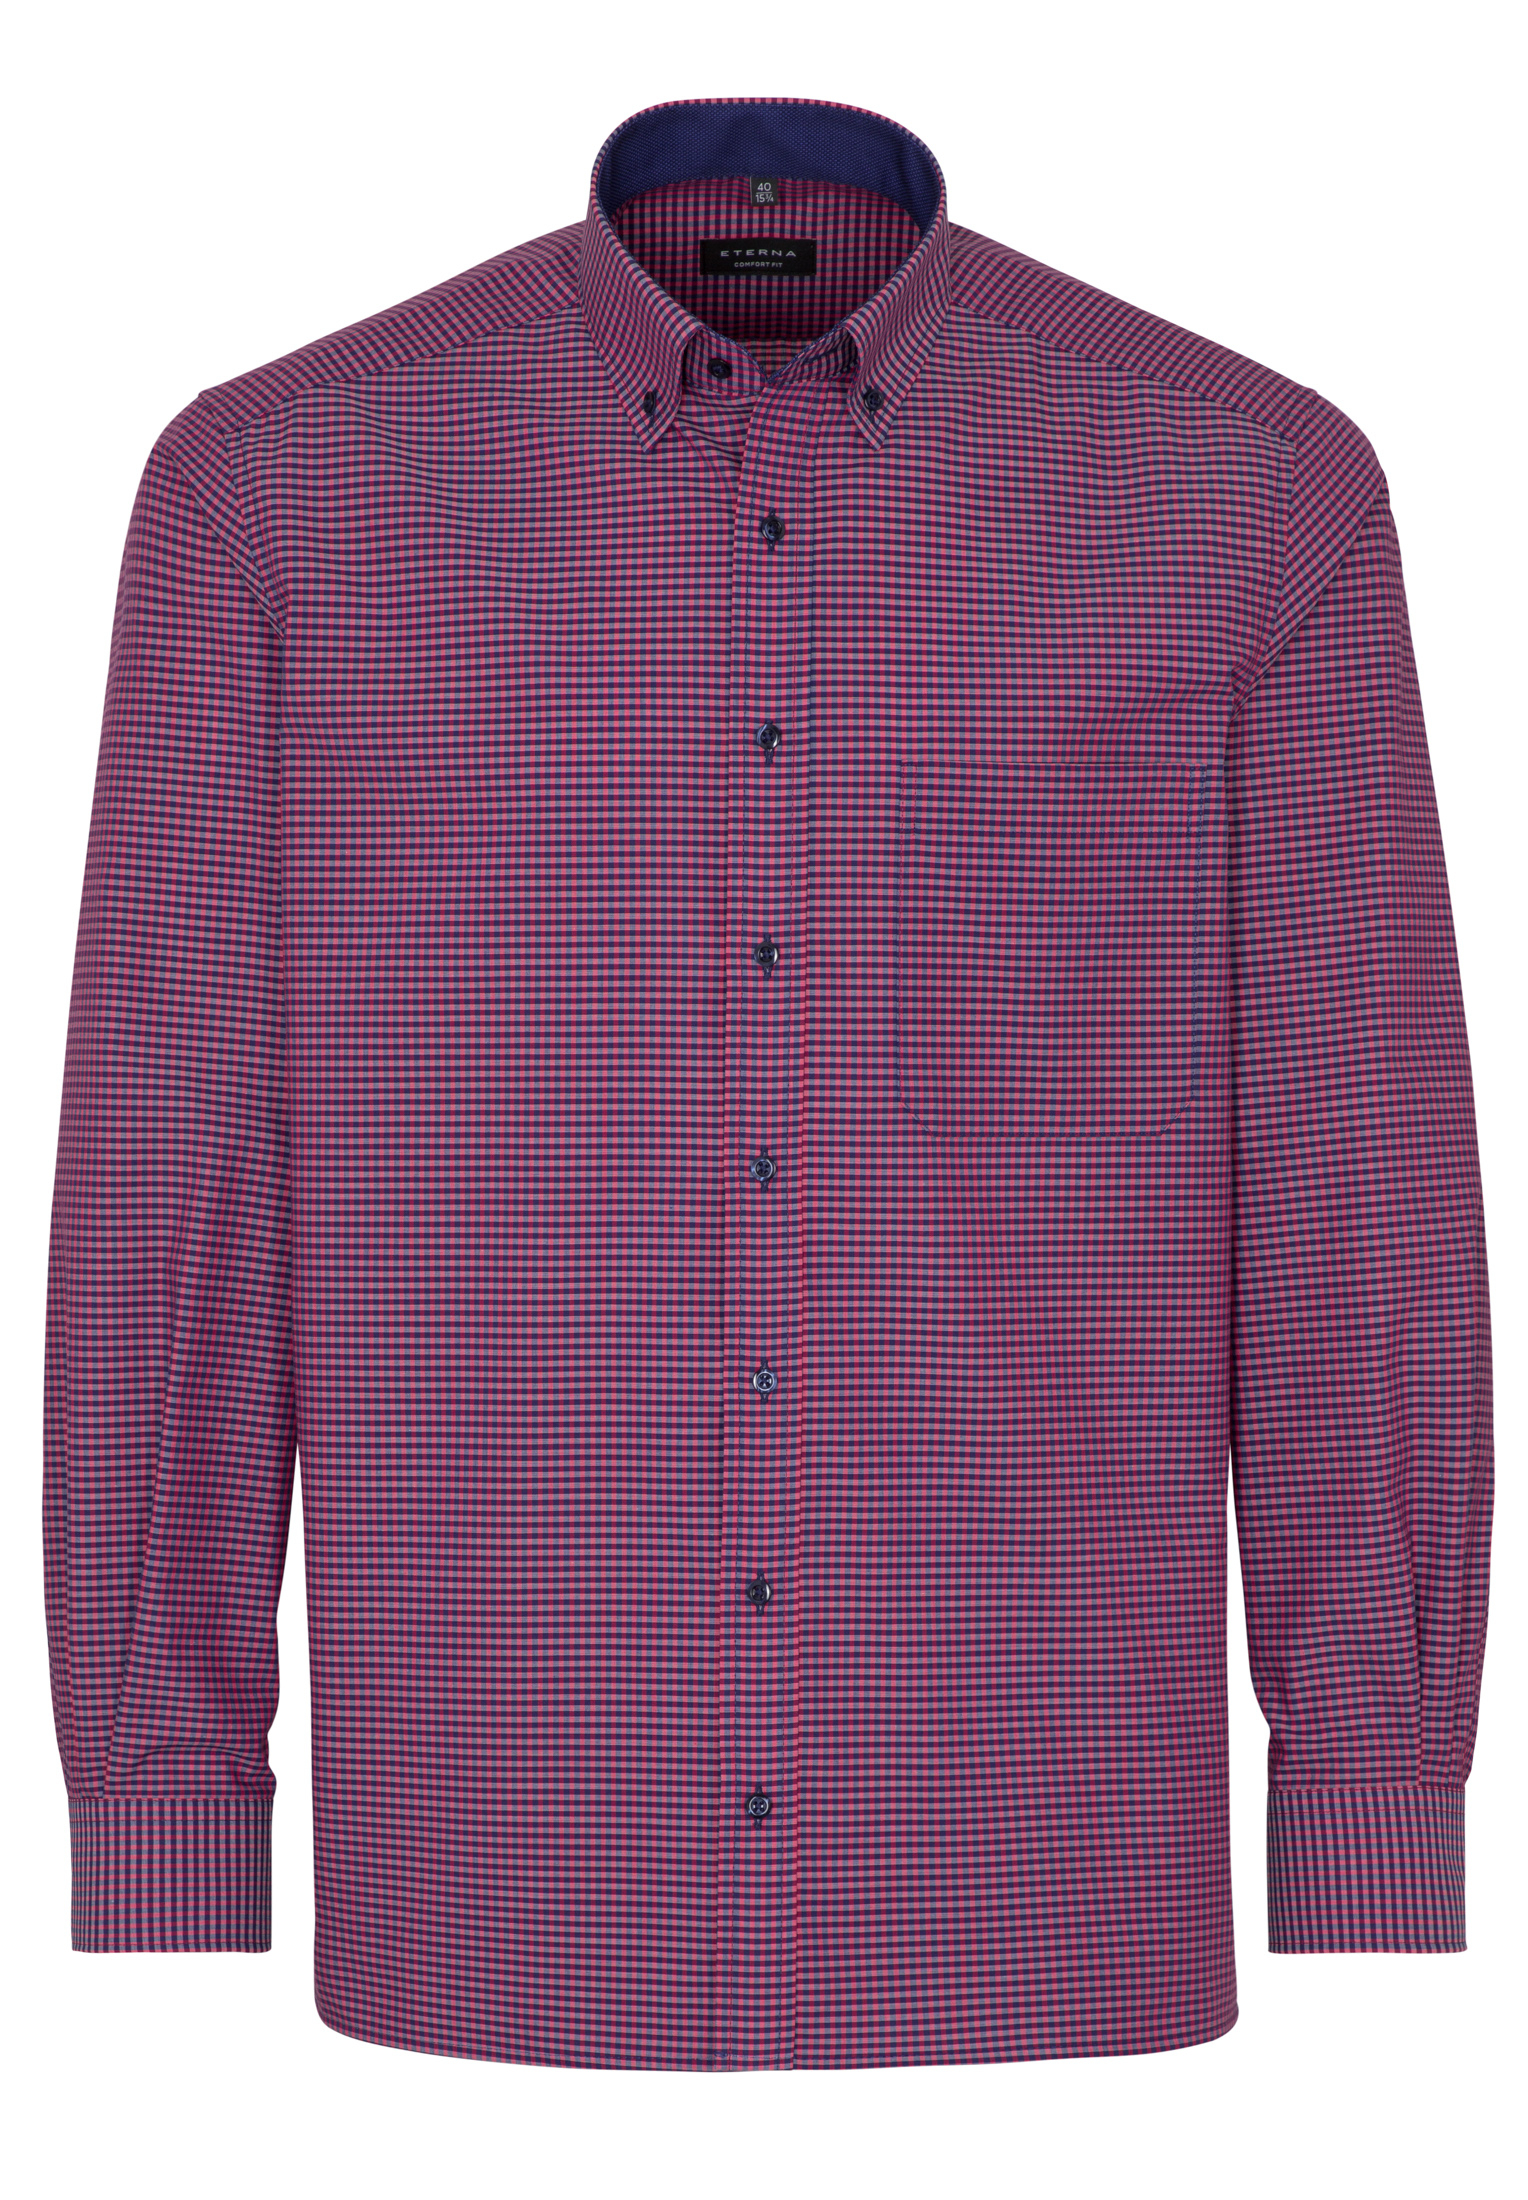 COMFORT FIT Shirt in sunset red checkered